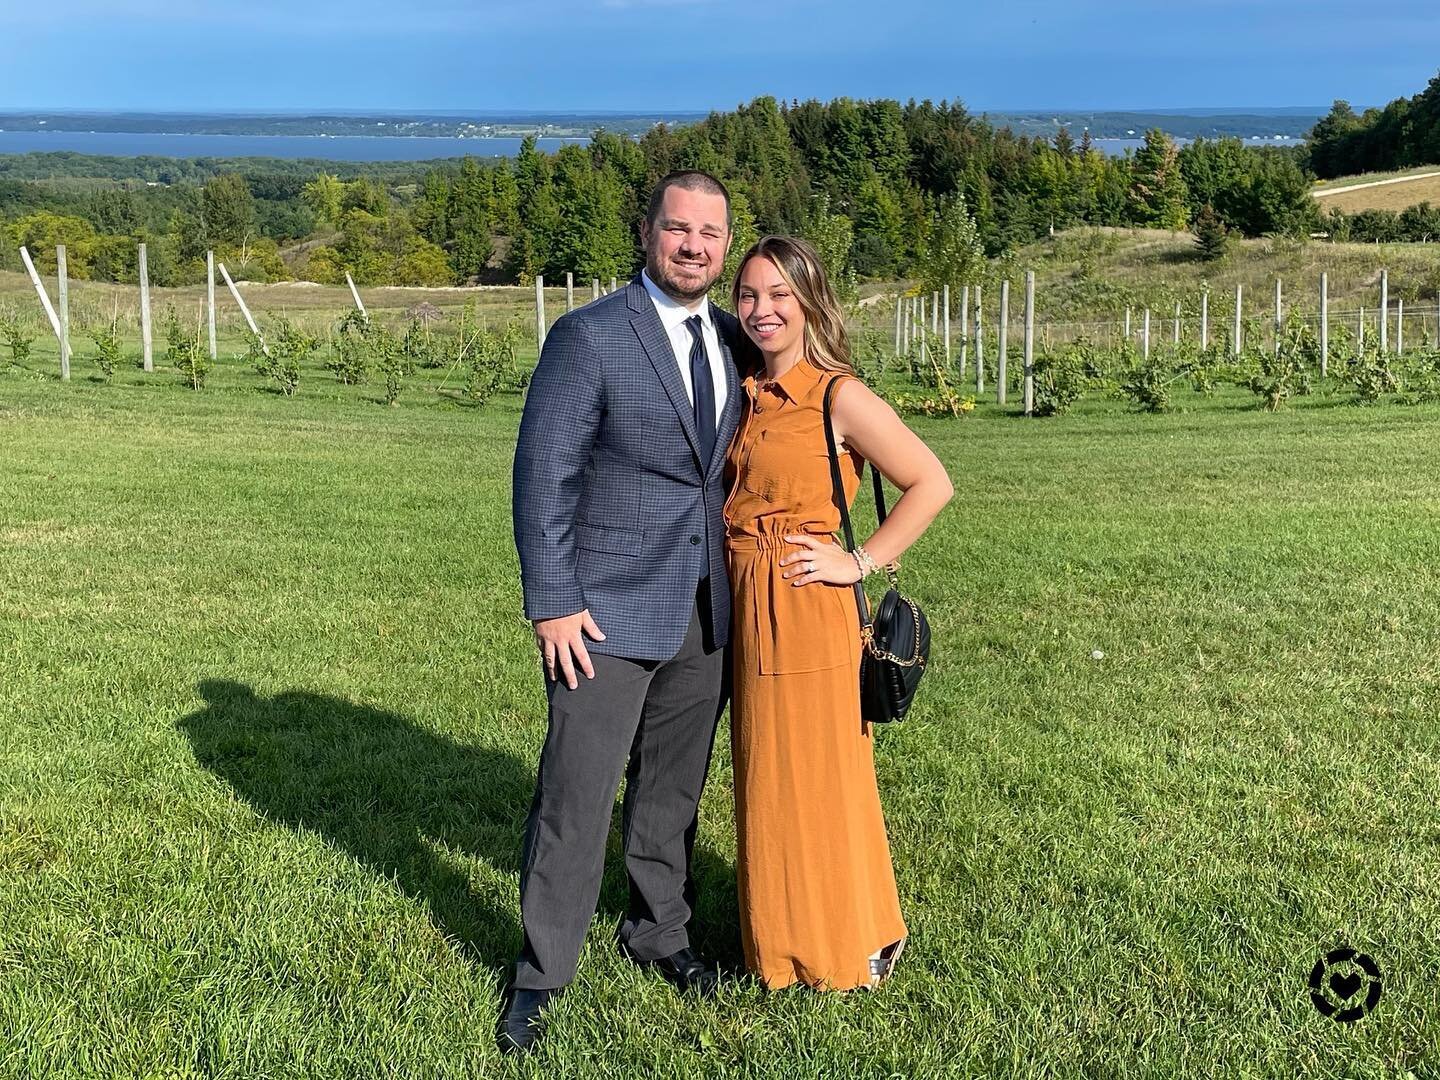 We had an amazing time in Traverse City over the weekend 🍷 
This view from the wedding we attended was so beautiful!! 

I found the perfect fall dress at @nordstromrack that can be worn for a wedding, for work, and would be perfect for fall family p